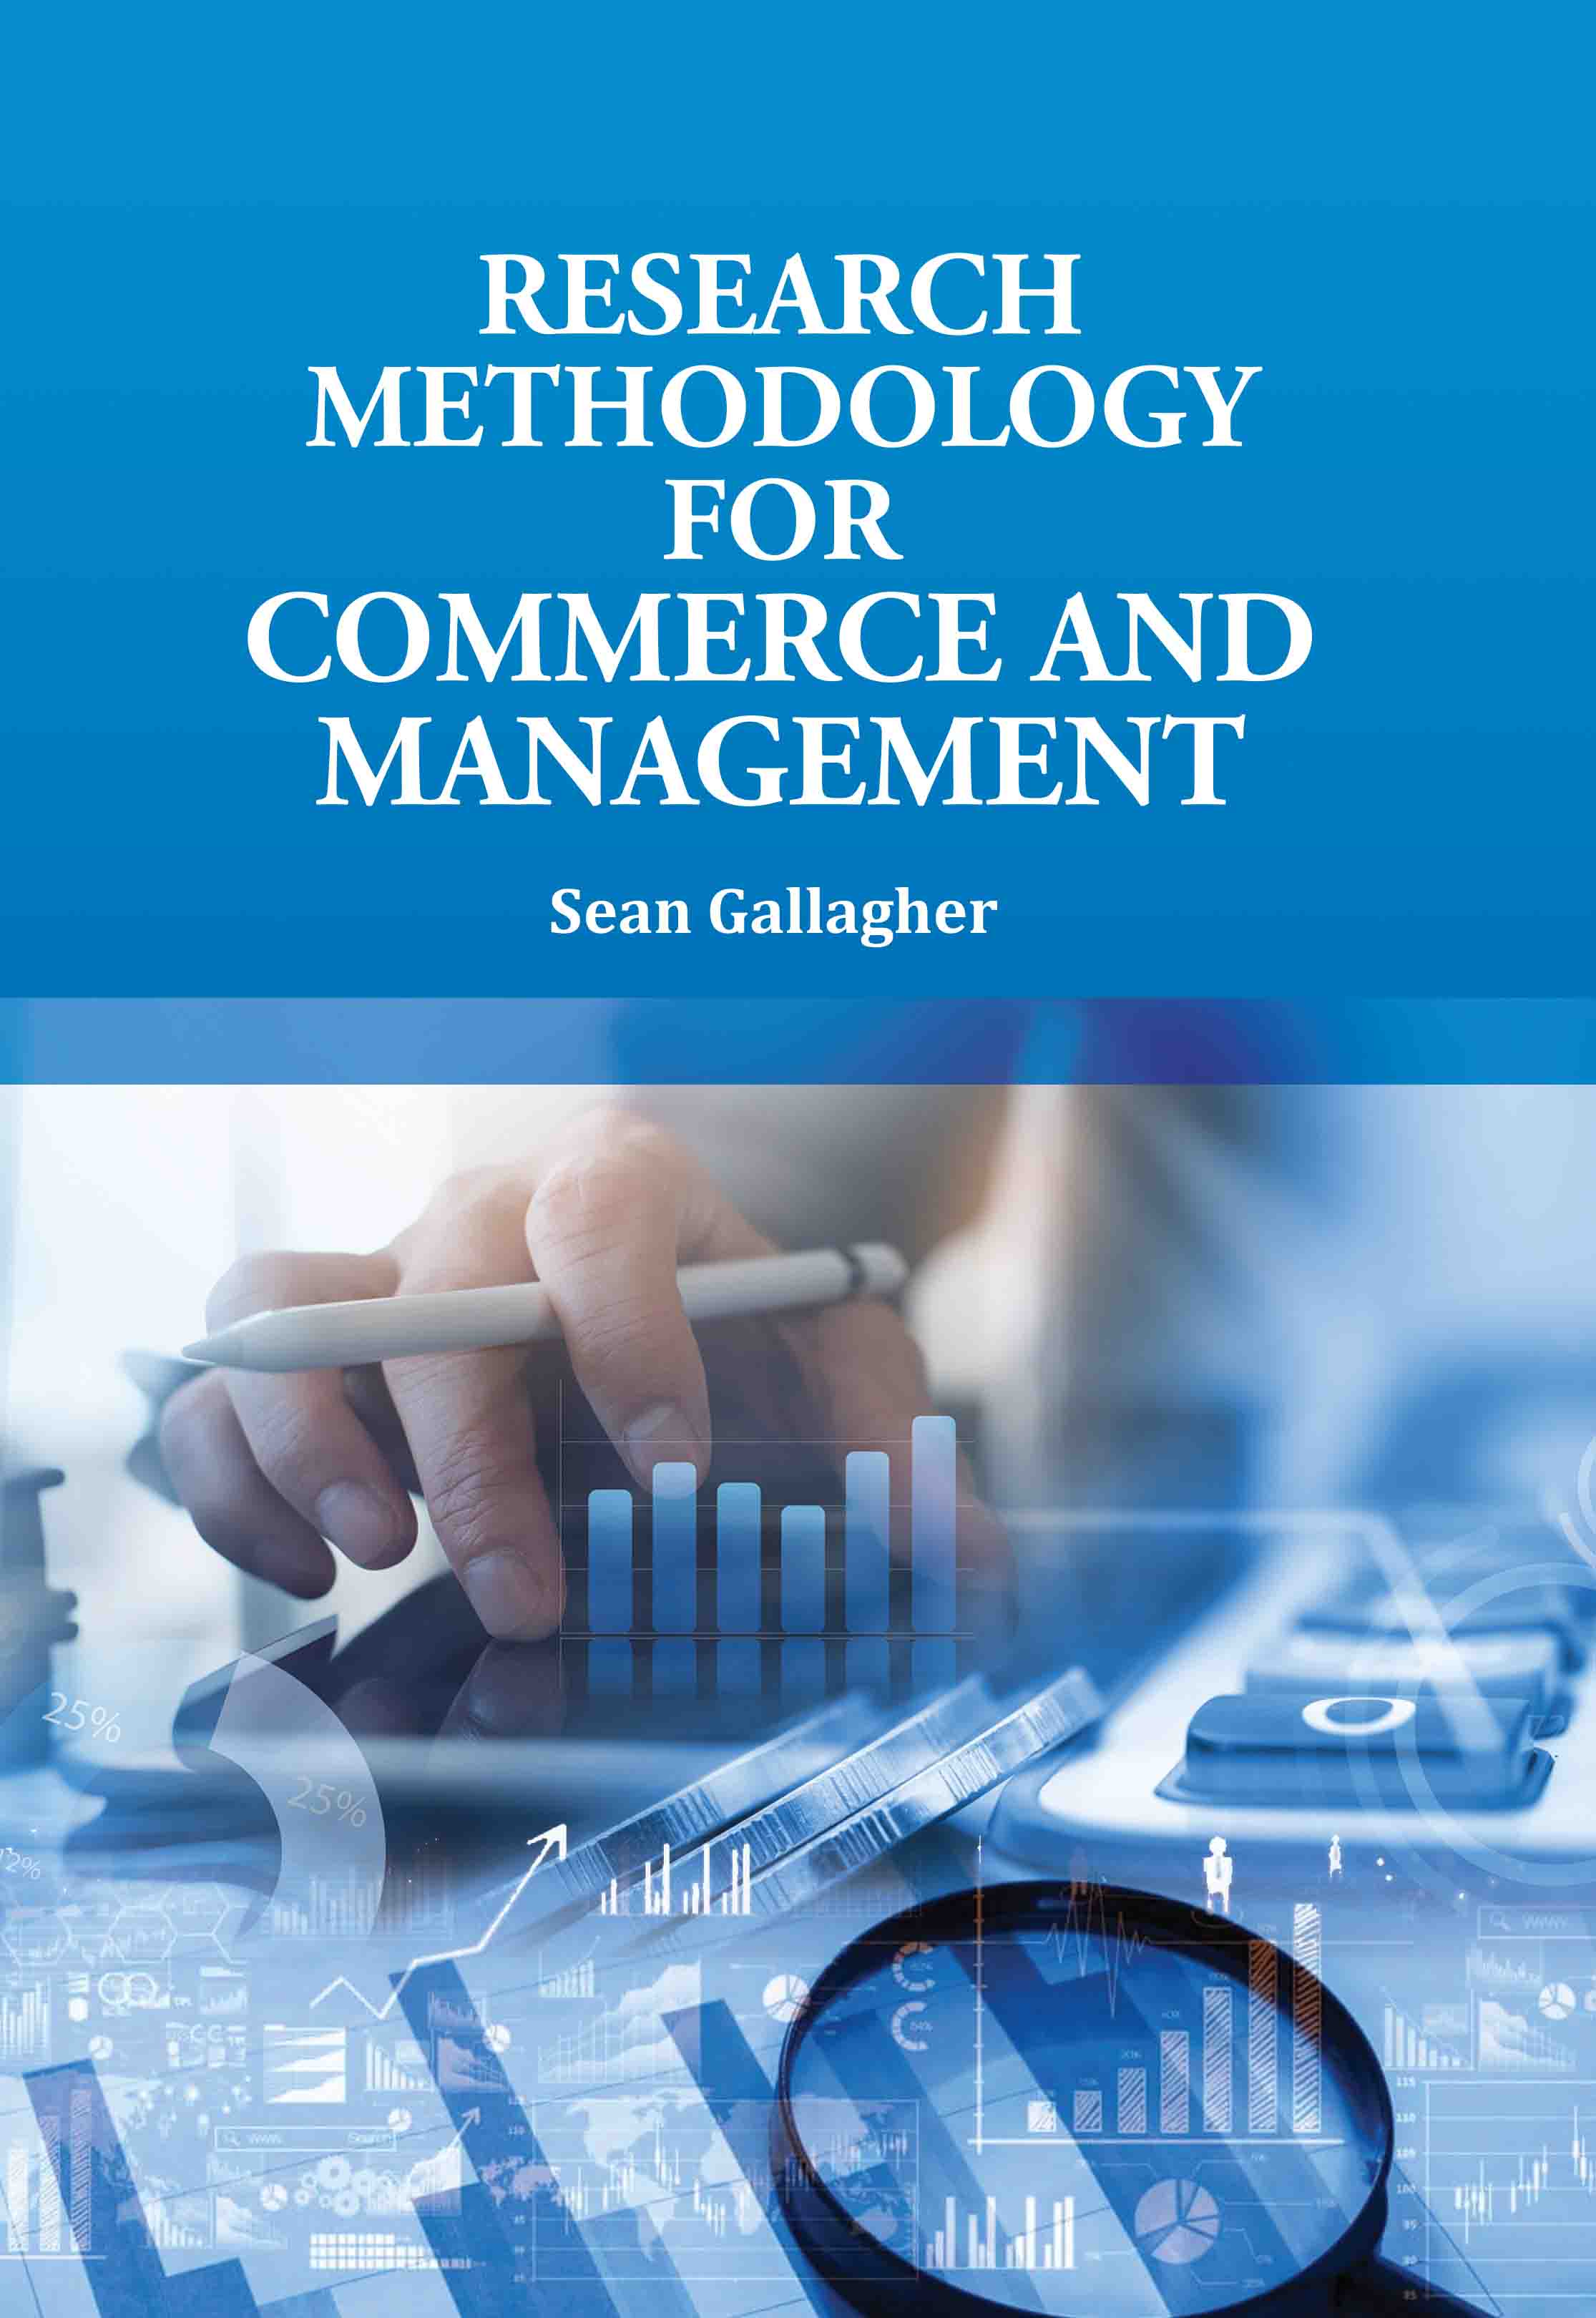 Research Methodology for Commerce and Management